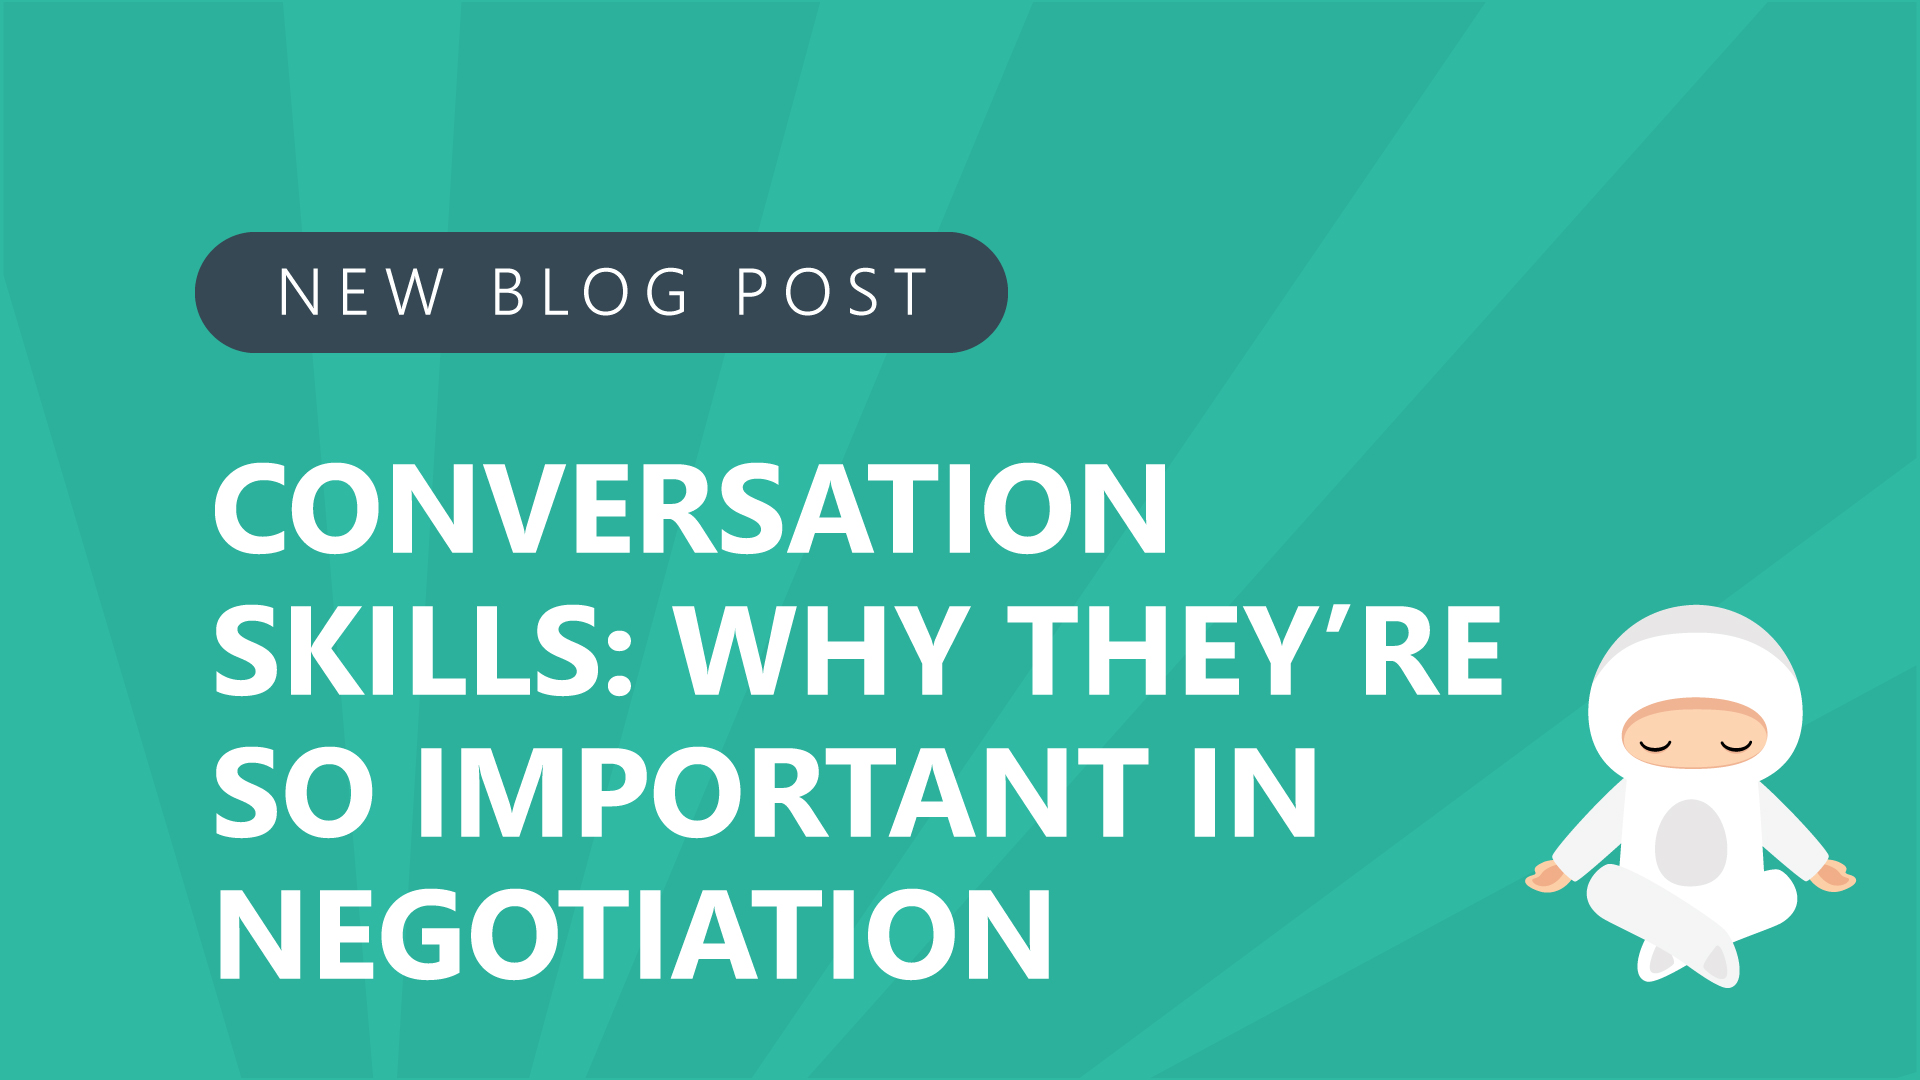 74-onversation-Skills-Why-Theyre-SO-Important-in-Negotiation-1.jpg